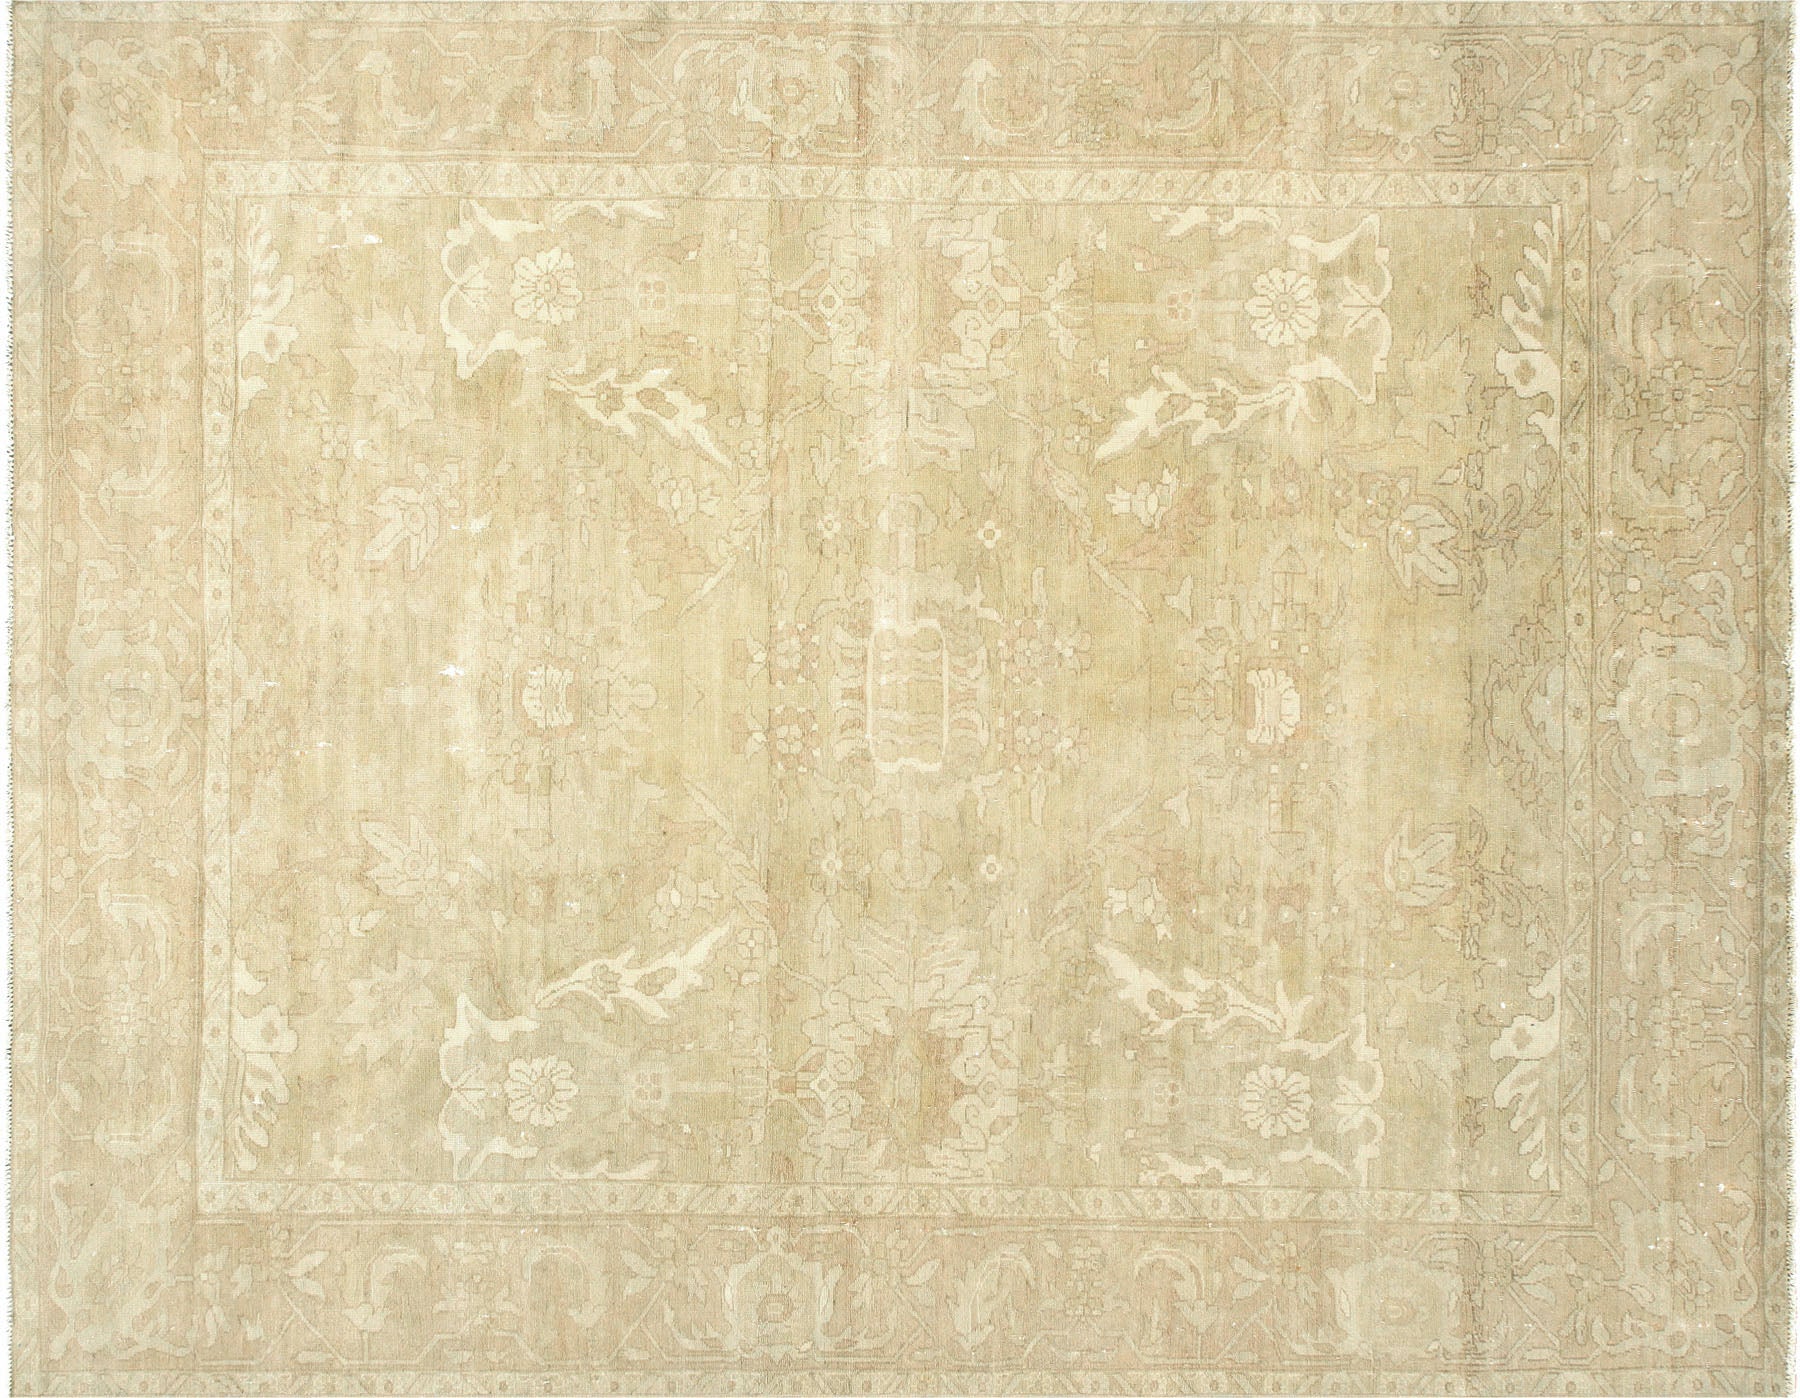 Recently Woven Egyptian Sultanabad Rug - 7'8" x 9'8"